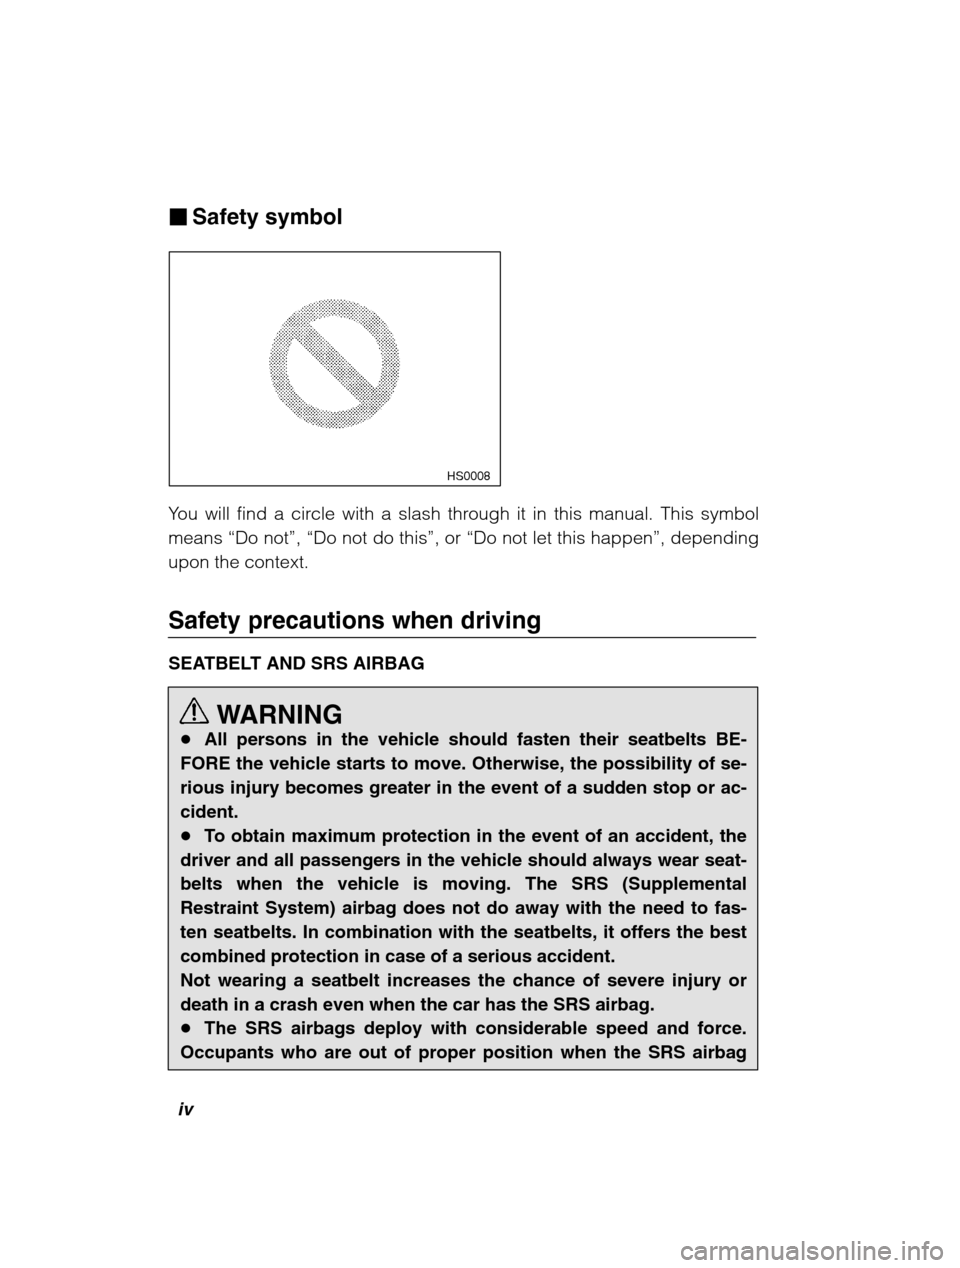 SUBARU OUTBACK 2002 3.G Owners Manual iv
�Safety symbol
 HS0008
You will find a circle with a slash through it in this manual. This symbol means  “Do not ”, “Do not do this ”, or  “Do not let this happen ”, depending
upon the 